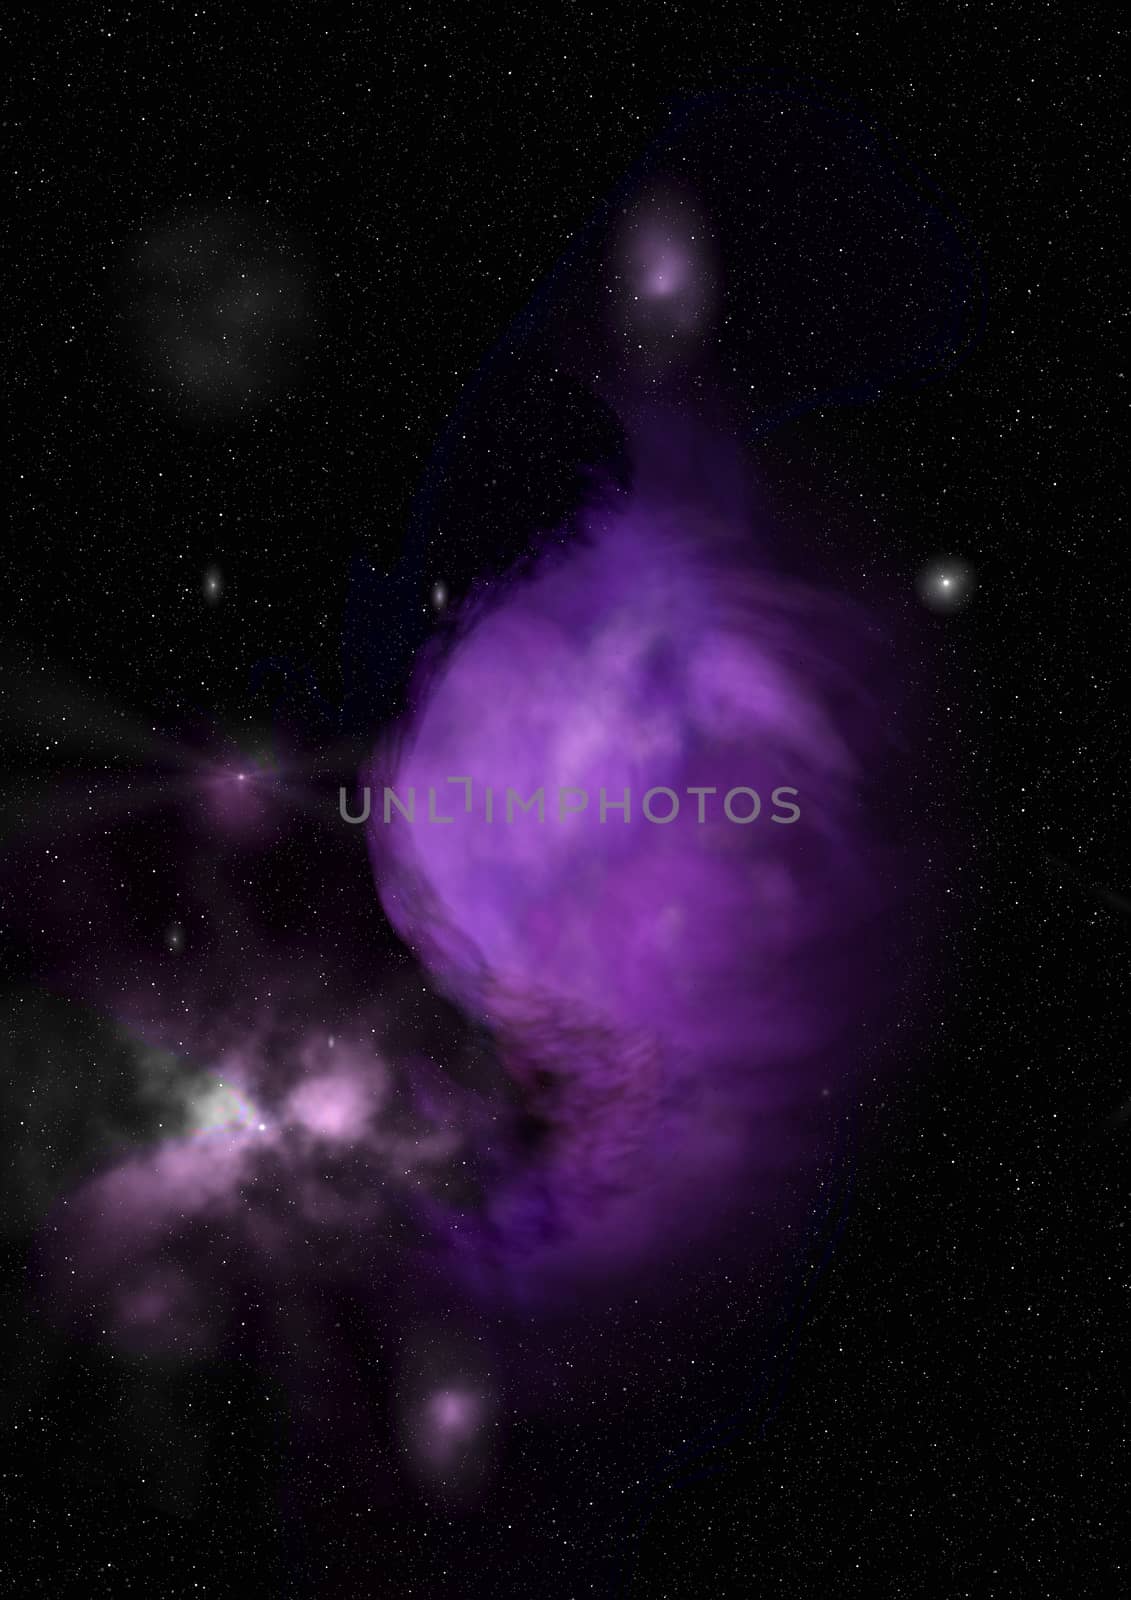 Star field in space a nebulae and a gas congestion. "Elements of this image furnished by NASA".